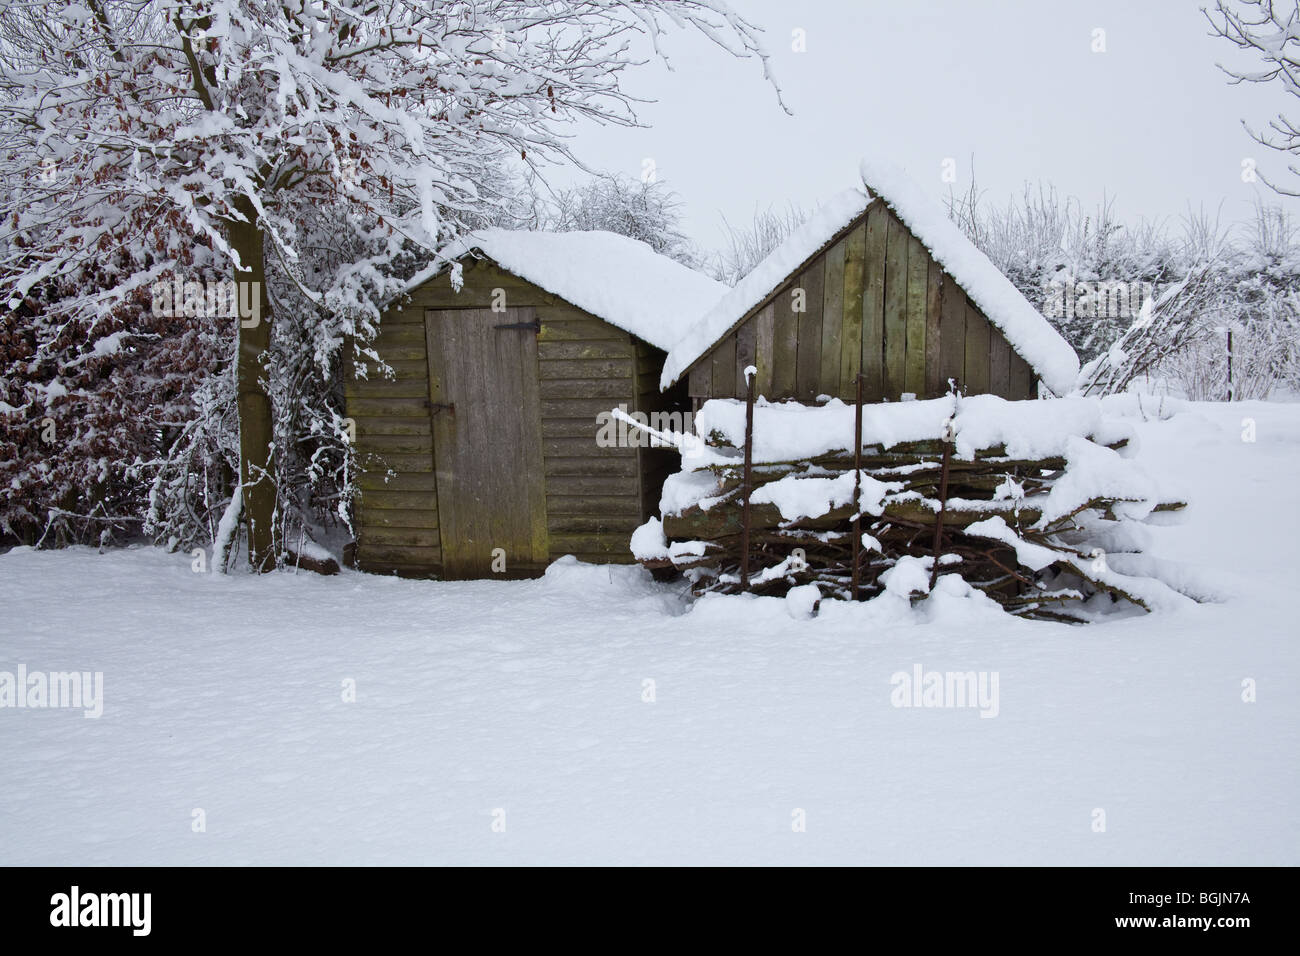 Snow covered wooden garden sheds, Hampshire , England. Stock Photo